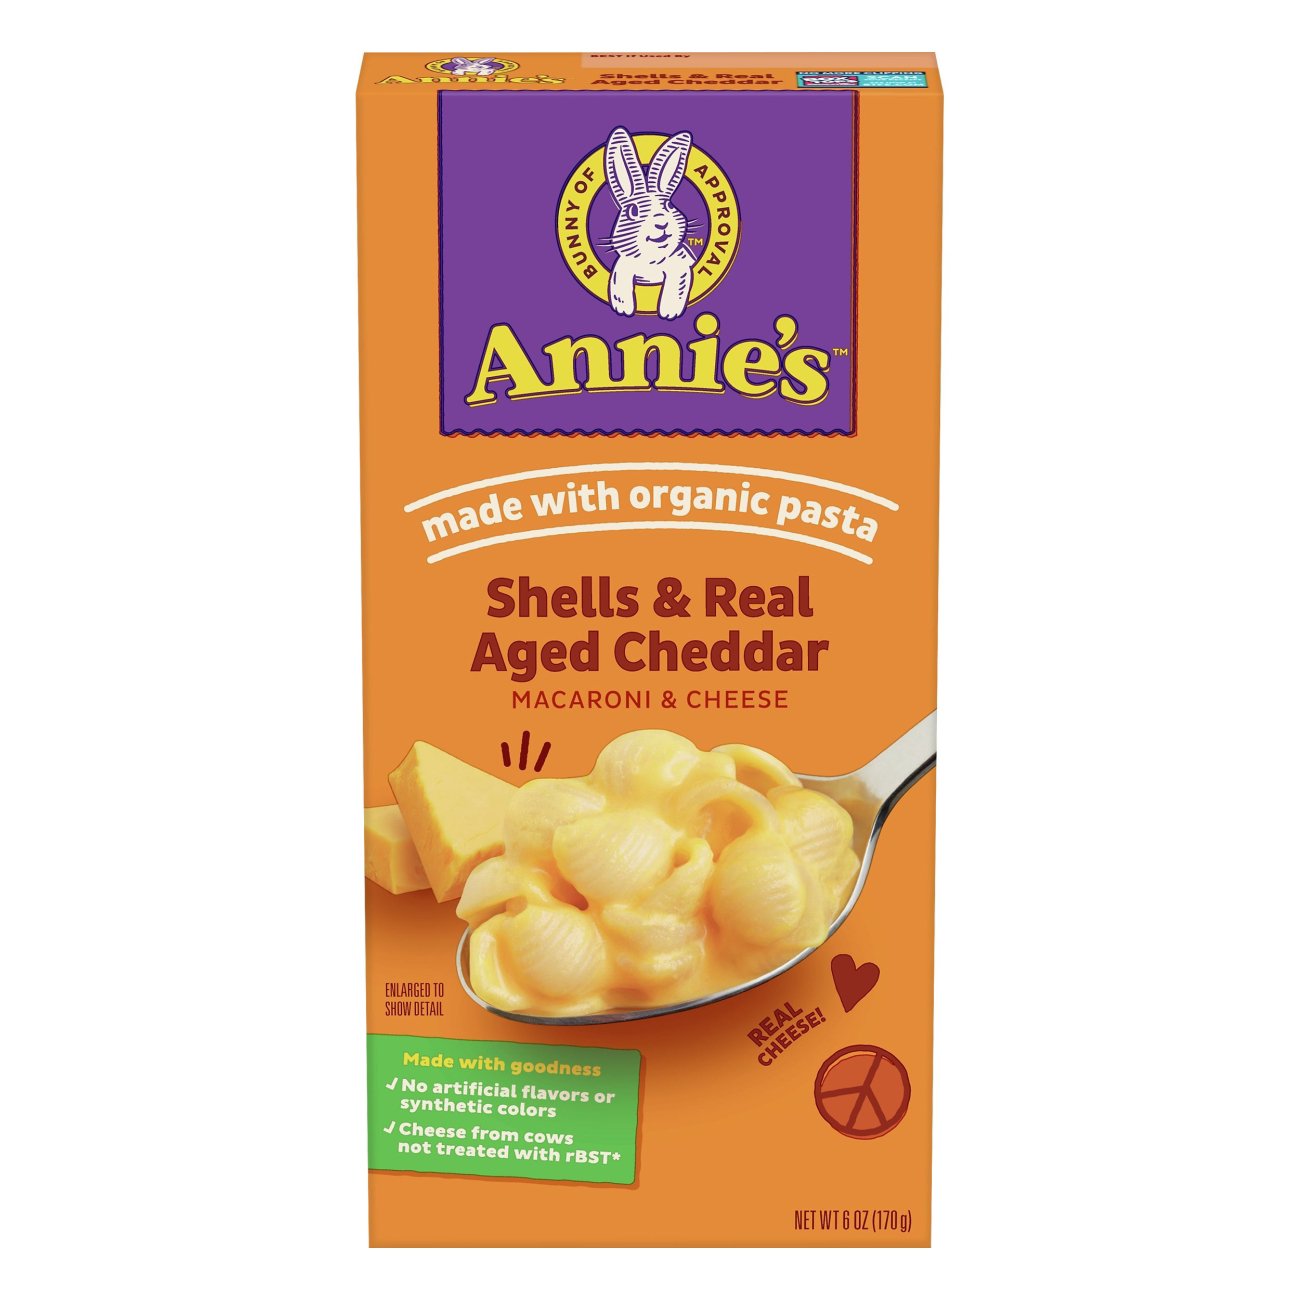 Annie's Homegrown Shells and Real Aged Cheddar Macaroni and Cheese